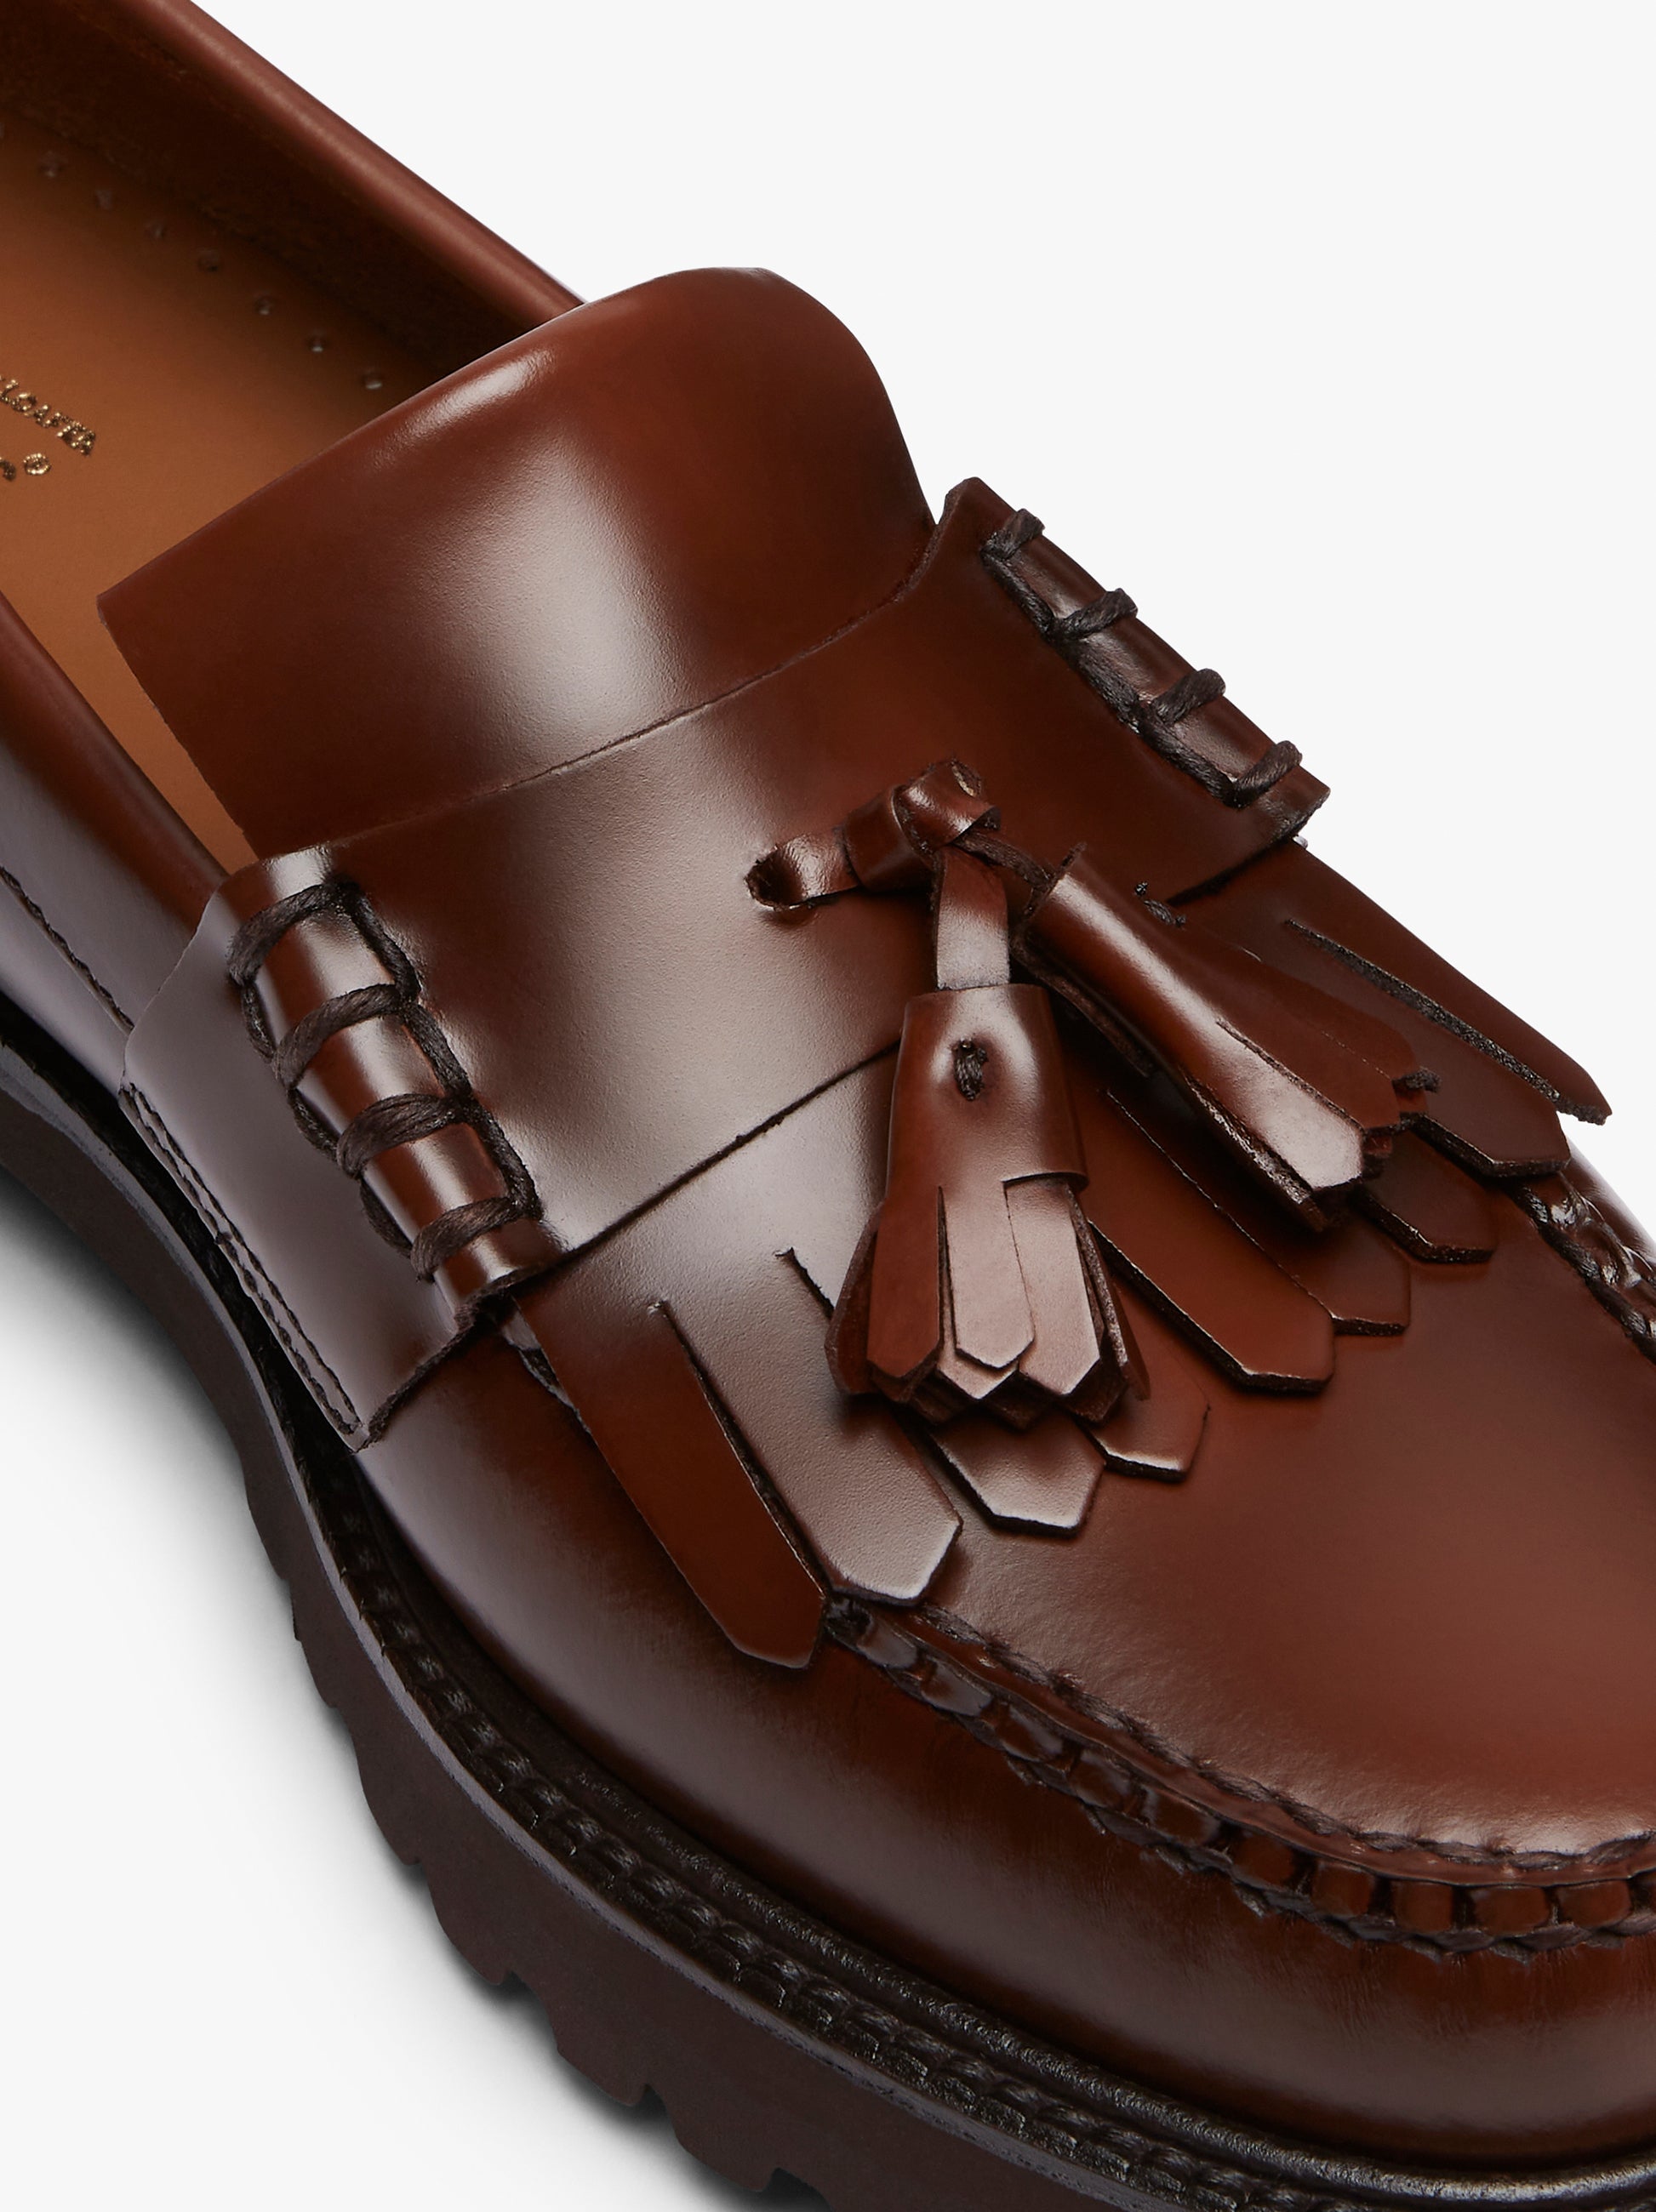 Mens Kiltie Tassel Loafers | Brown Leather Loafers – G.H.BASS